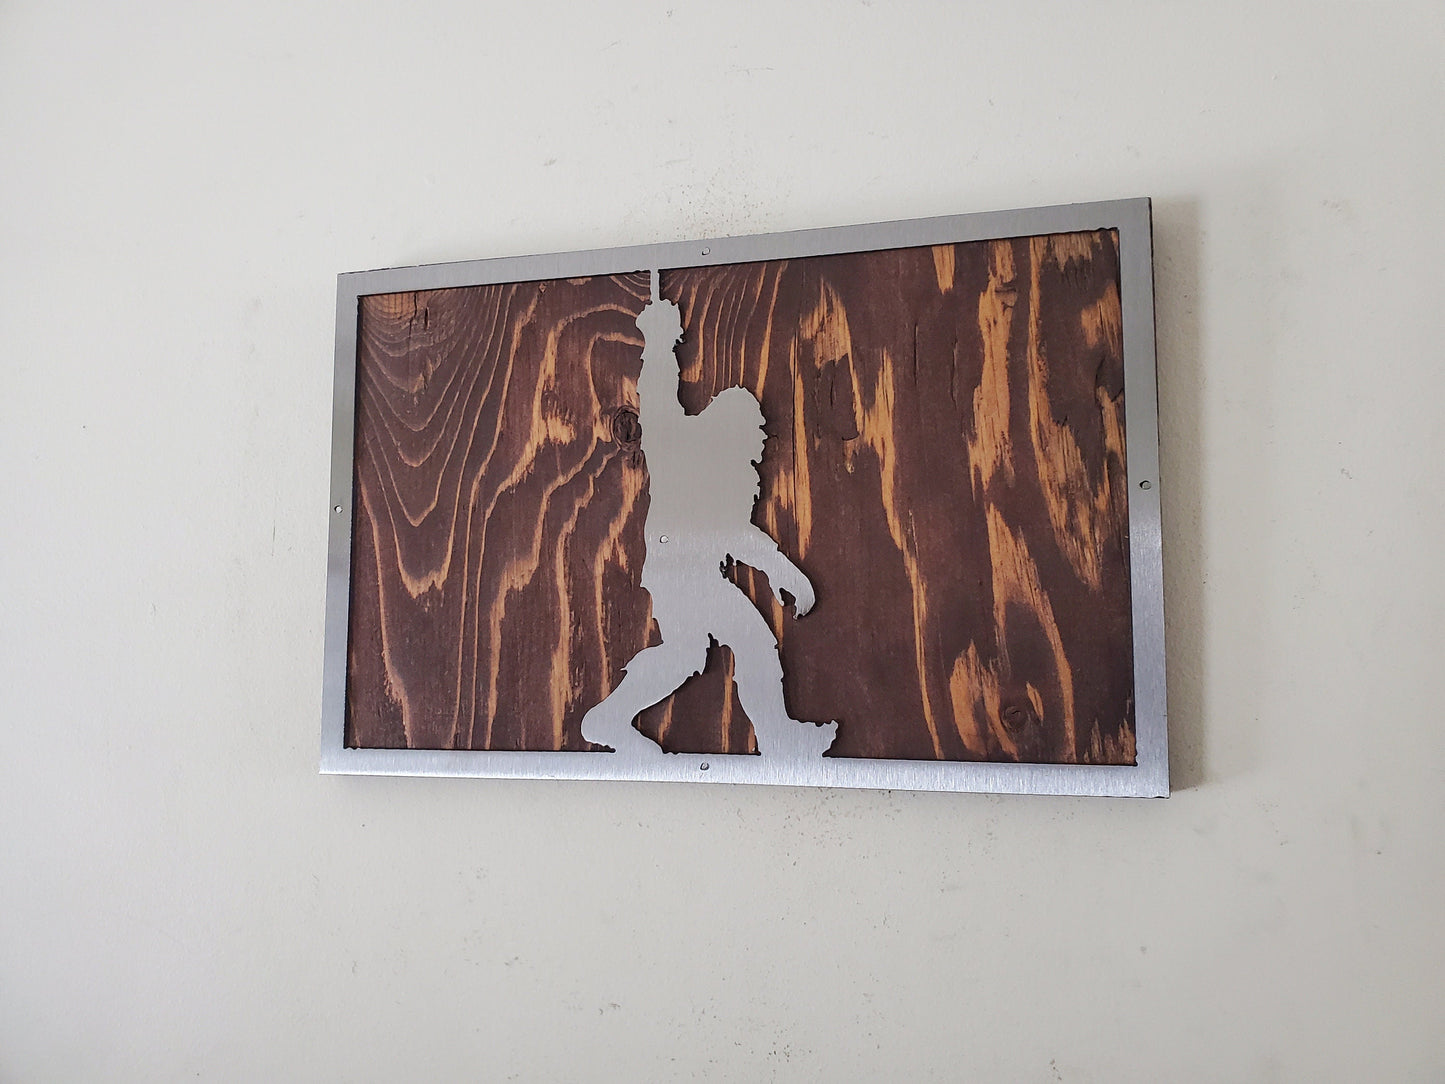 Bigfoot Giving the Finger | Sasquatch Metal Art on Wood | Funny Sign Wall Art